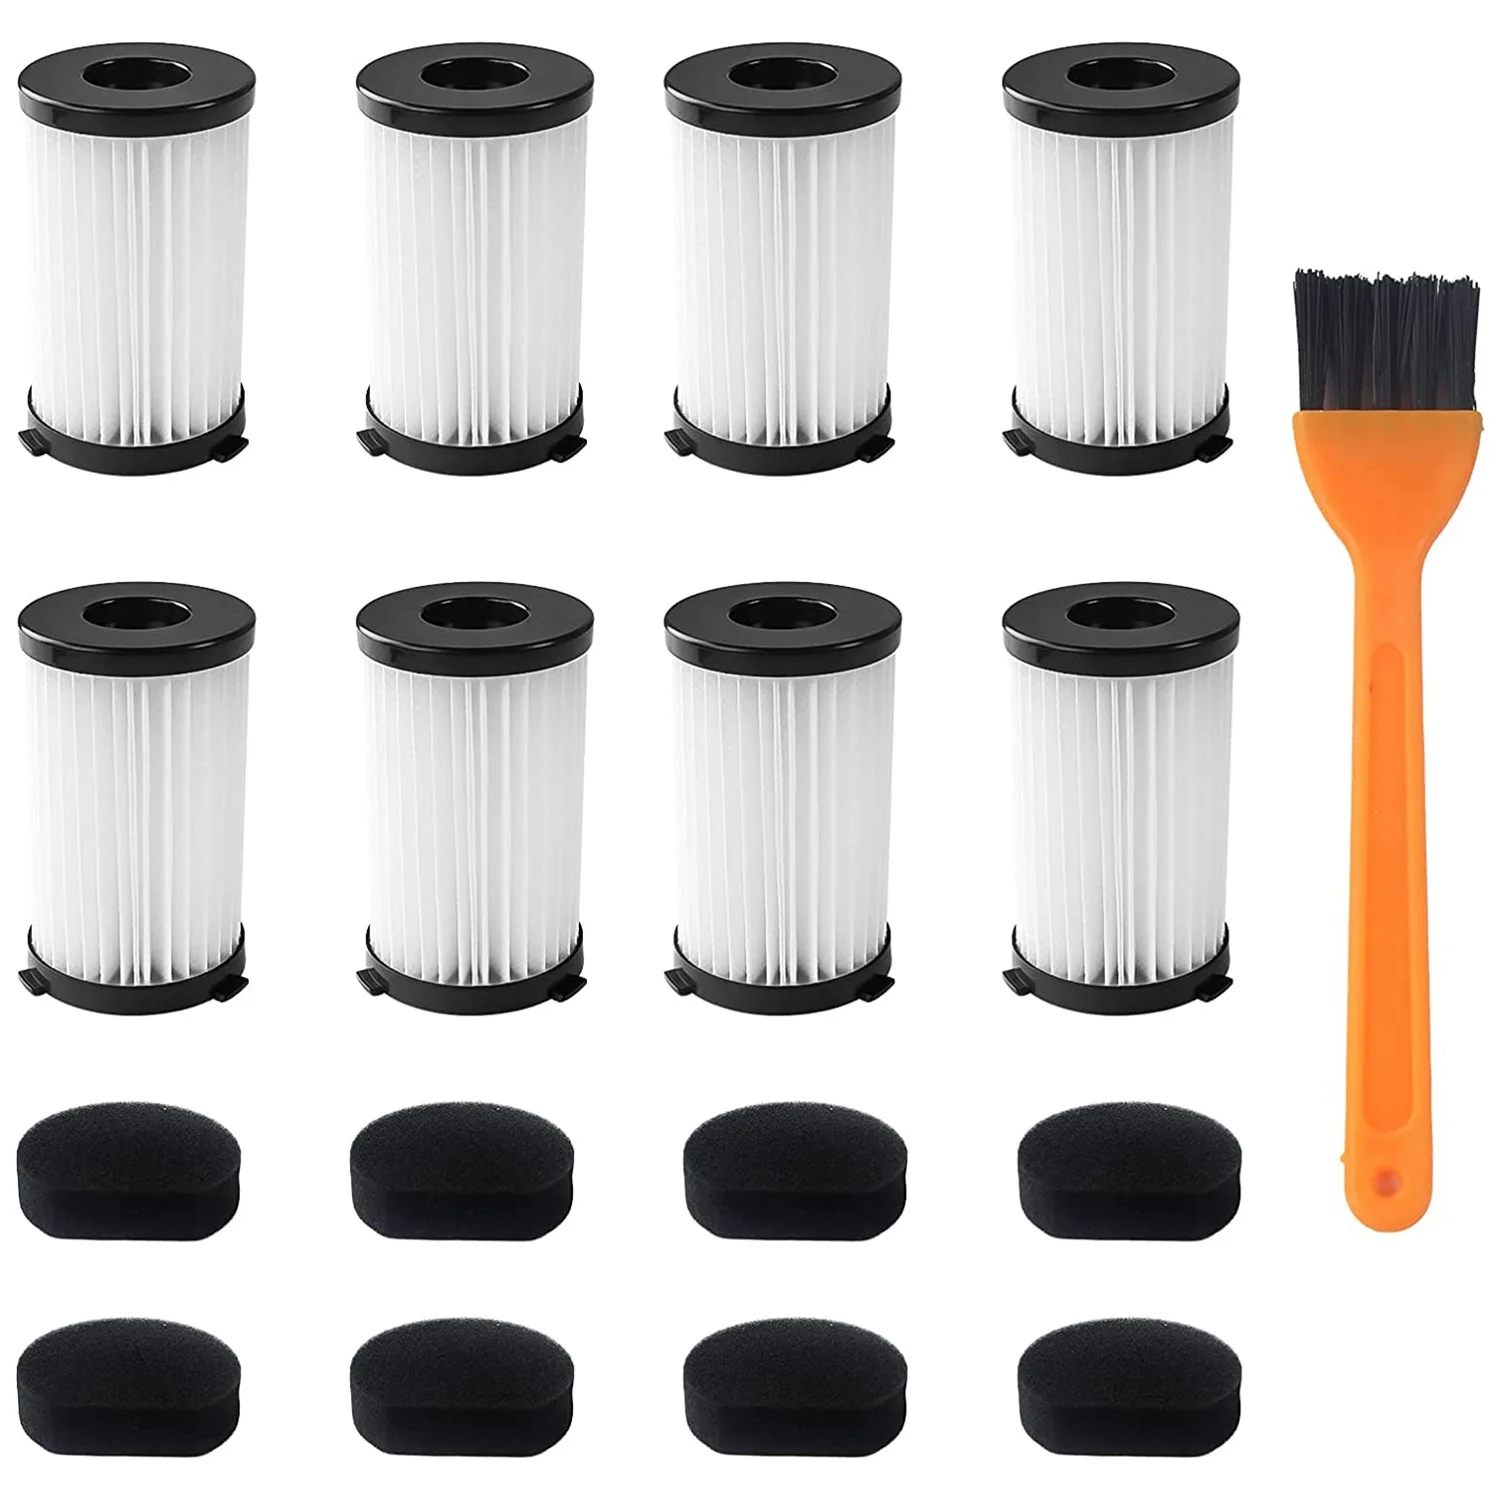 

Replacement Filters for MOOSOO D600 and Ariete Handyforce Vacuums RBT 2761 RBT 2759 Includes 8 Filters + 8 Foam Filters